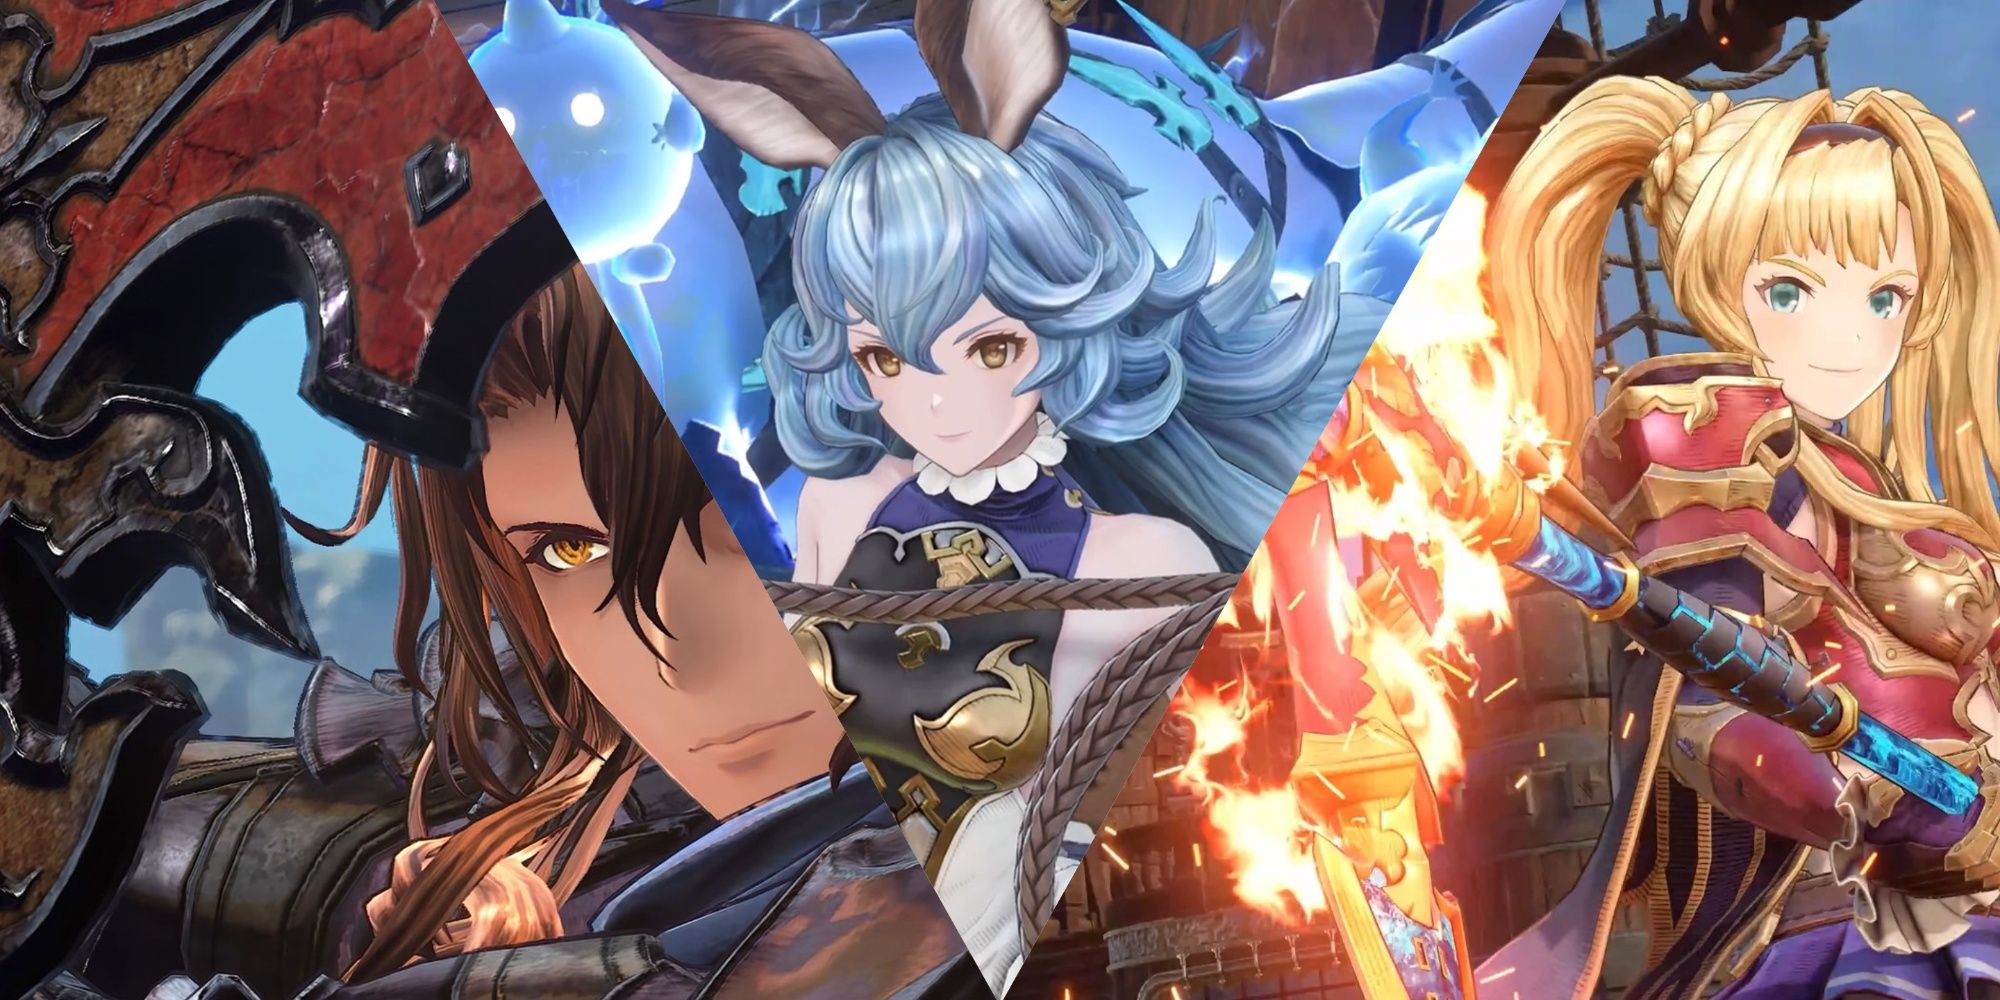 The Skybound Art attacks of Zeta, Ferry, and Siegfried from Granblue Fantasy: Relink